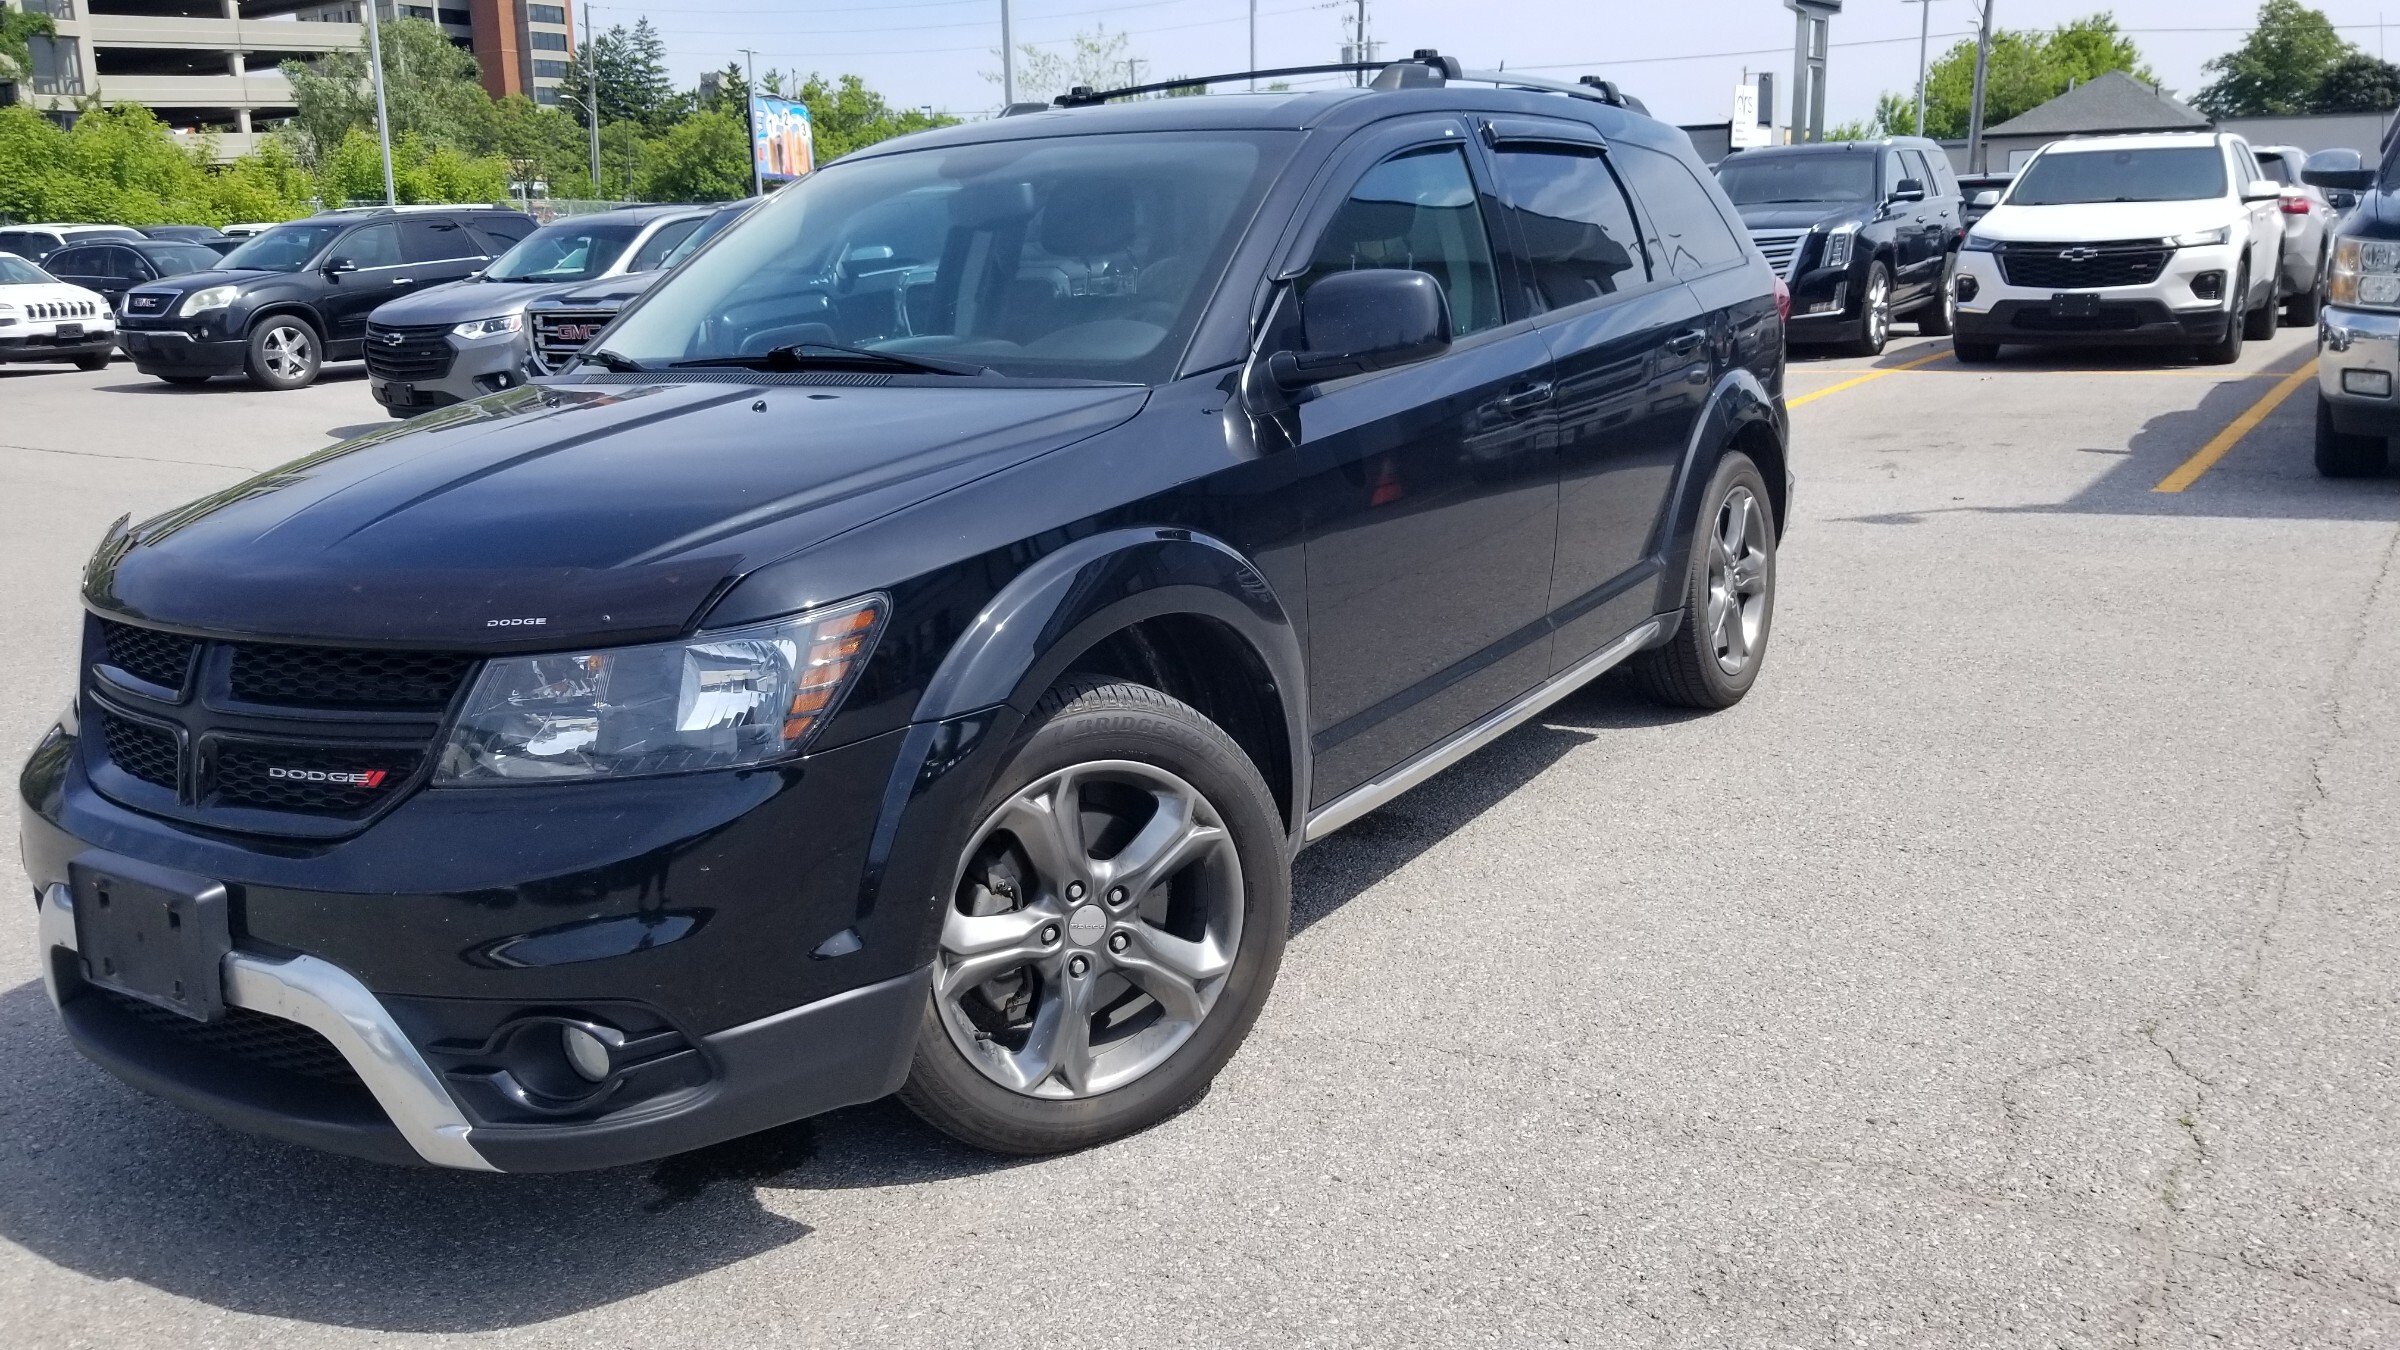 2015 Dodge Journey Second Set Of Tires / Roof Rack / Power Sunroof /